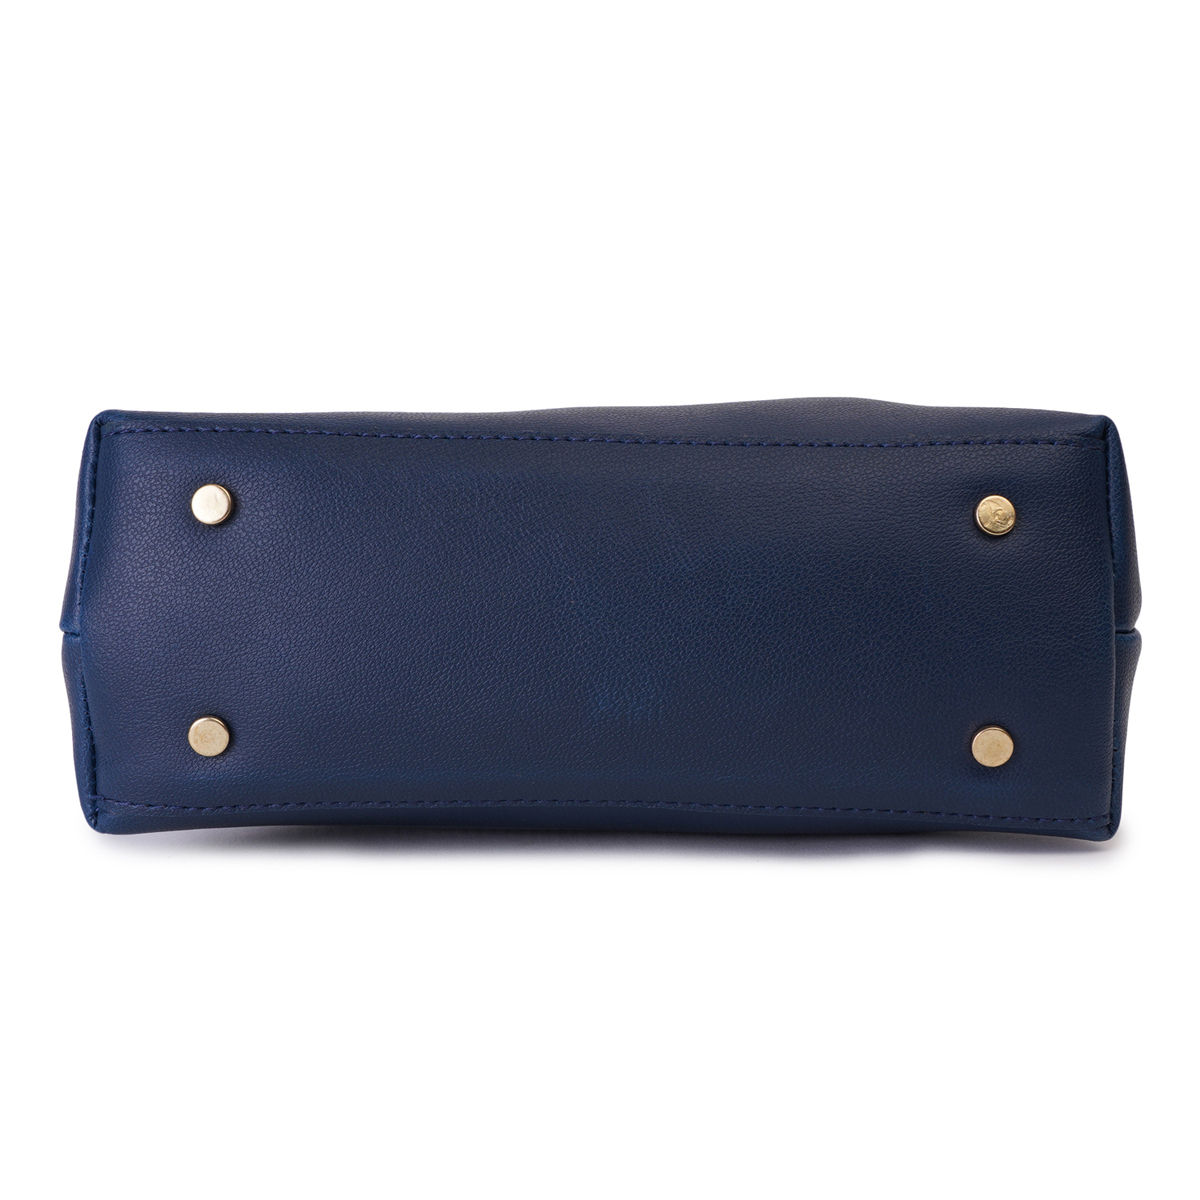 Pouch in grained leather red and navy blue - Bob Carlton